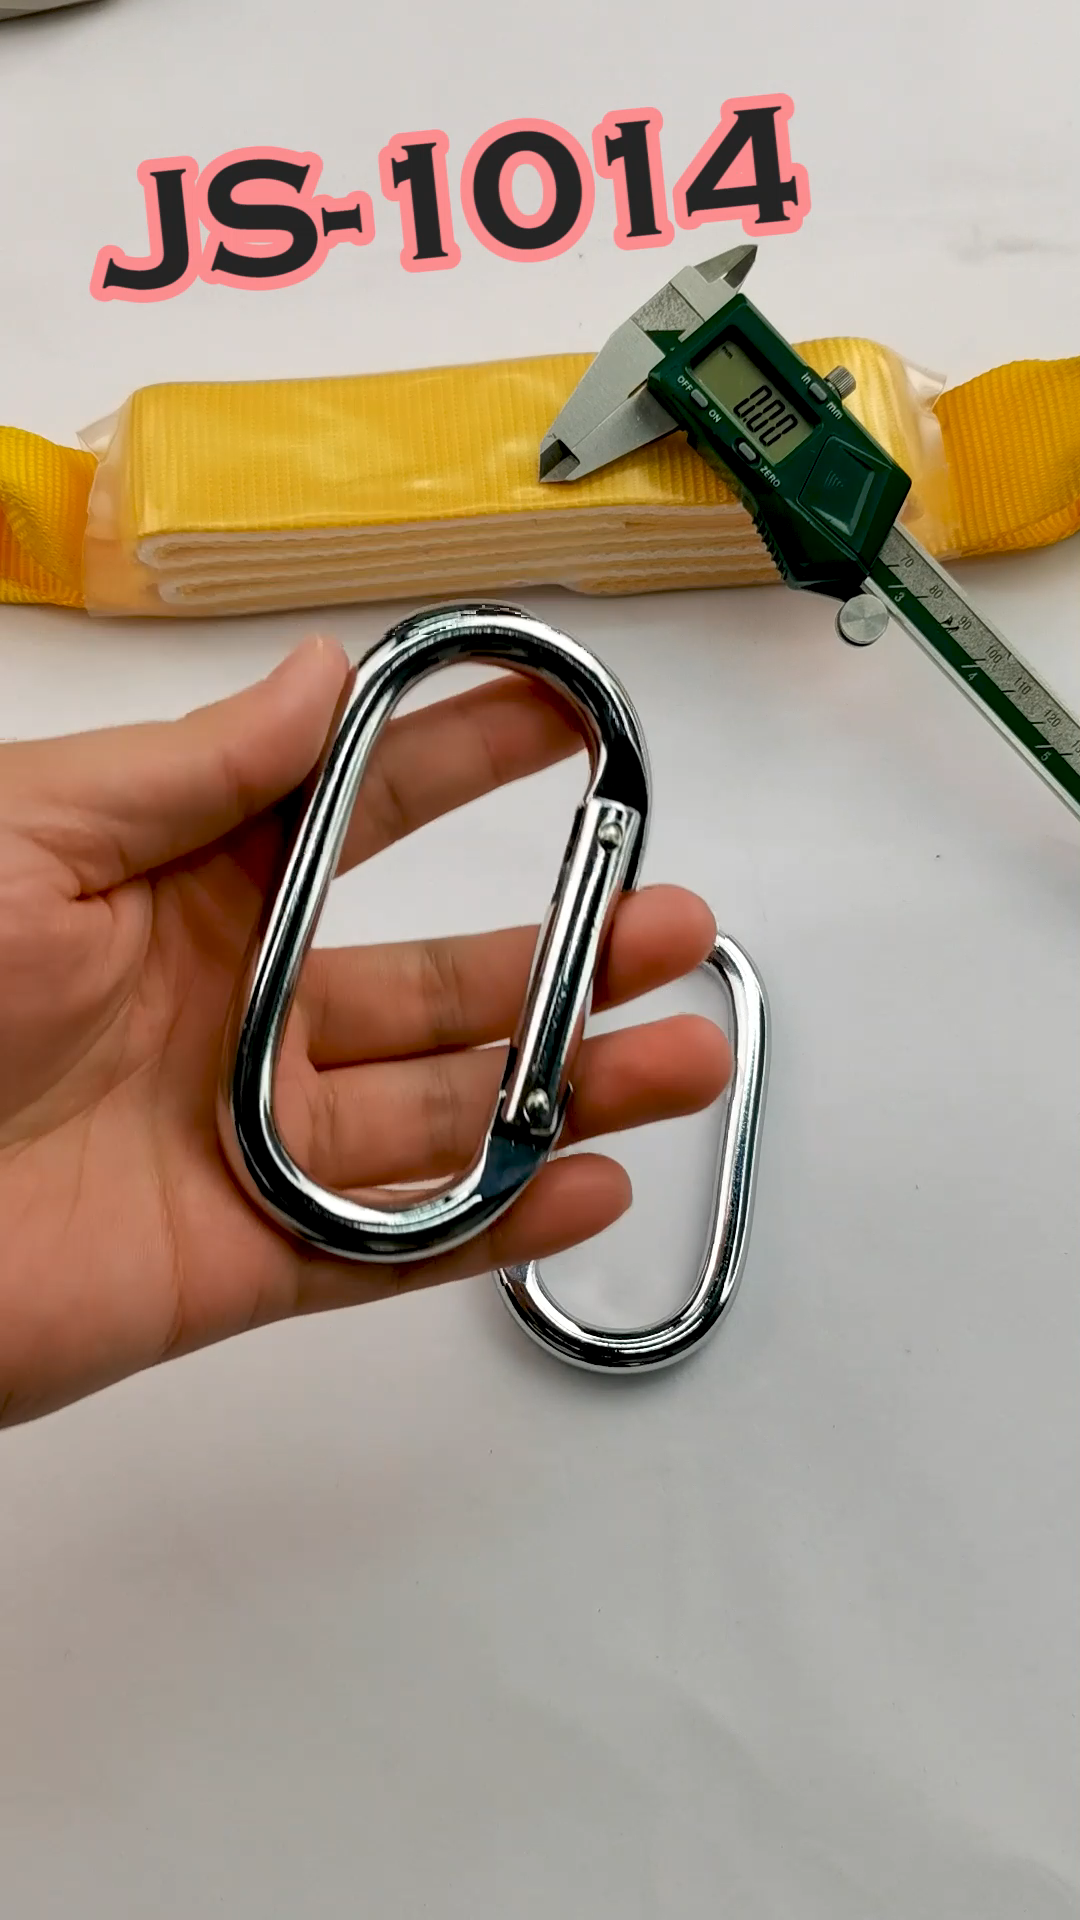 Alloy Carabiner Clip Locking Dog Leash Good Quality 23KN Chrome Plated Steel for Outdoor Hammocks Fishing 108 X 60mm Jinsong1